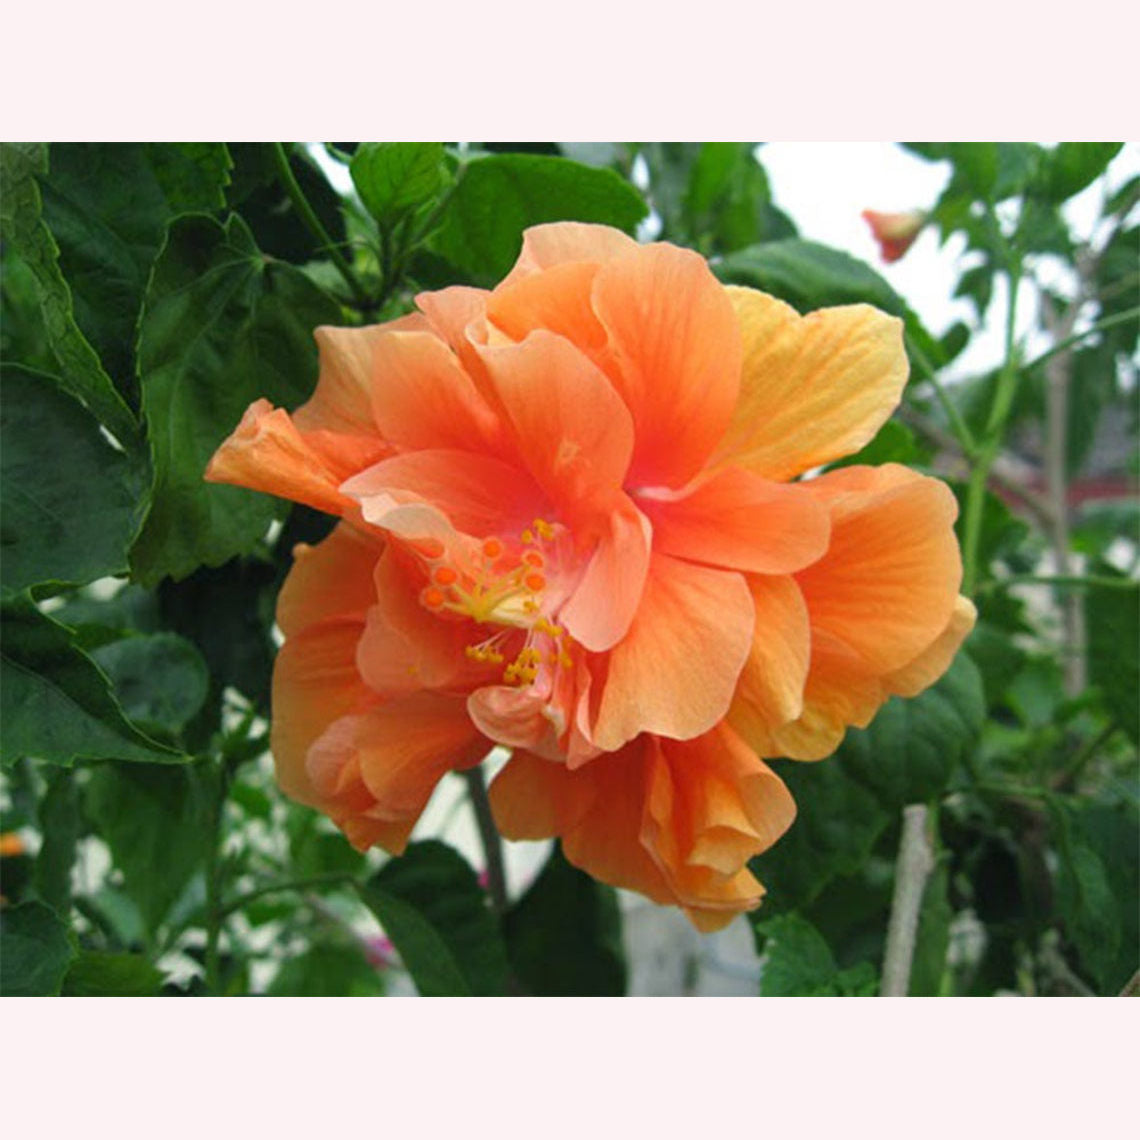 Tropical Hibiscus Double Peach Blooms flower.